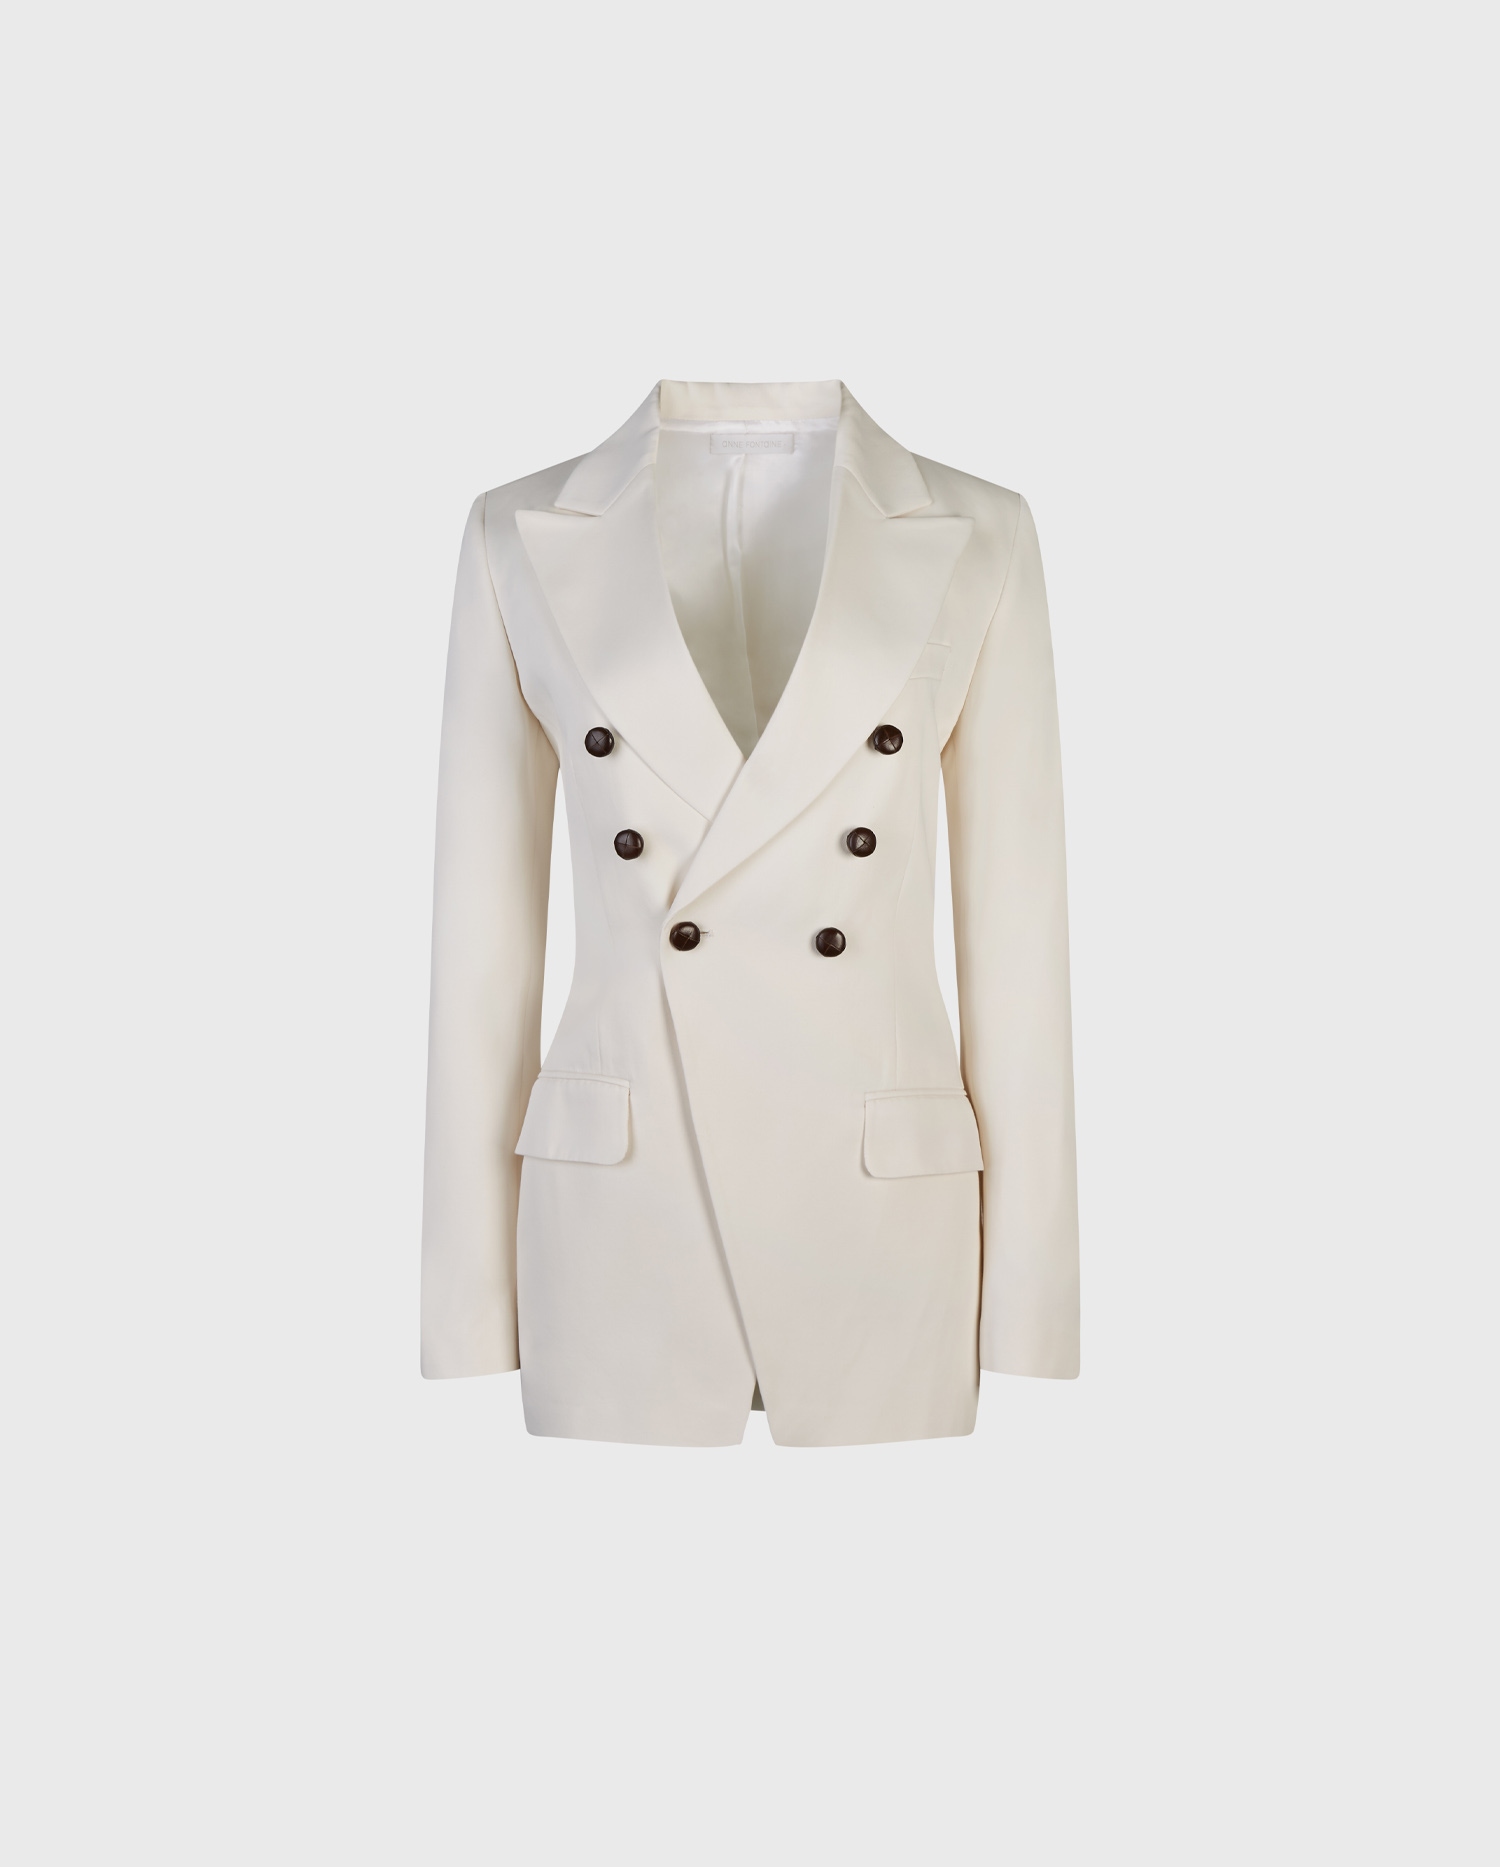 Shop the LONORA White Fitted Double-Breasted Blazer Type Suit Jacket from designer Anne Fontaine